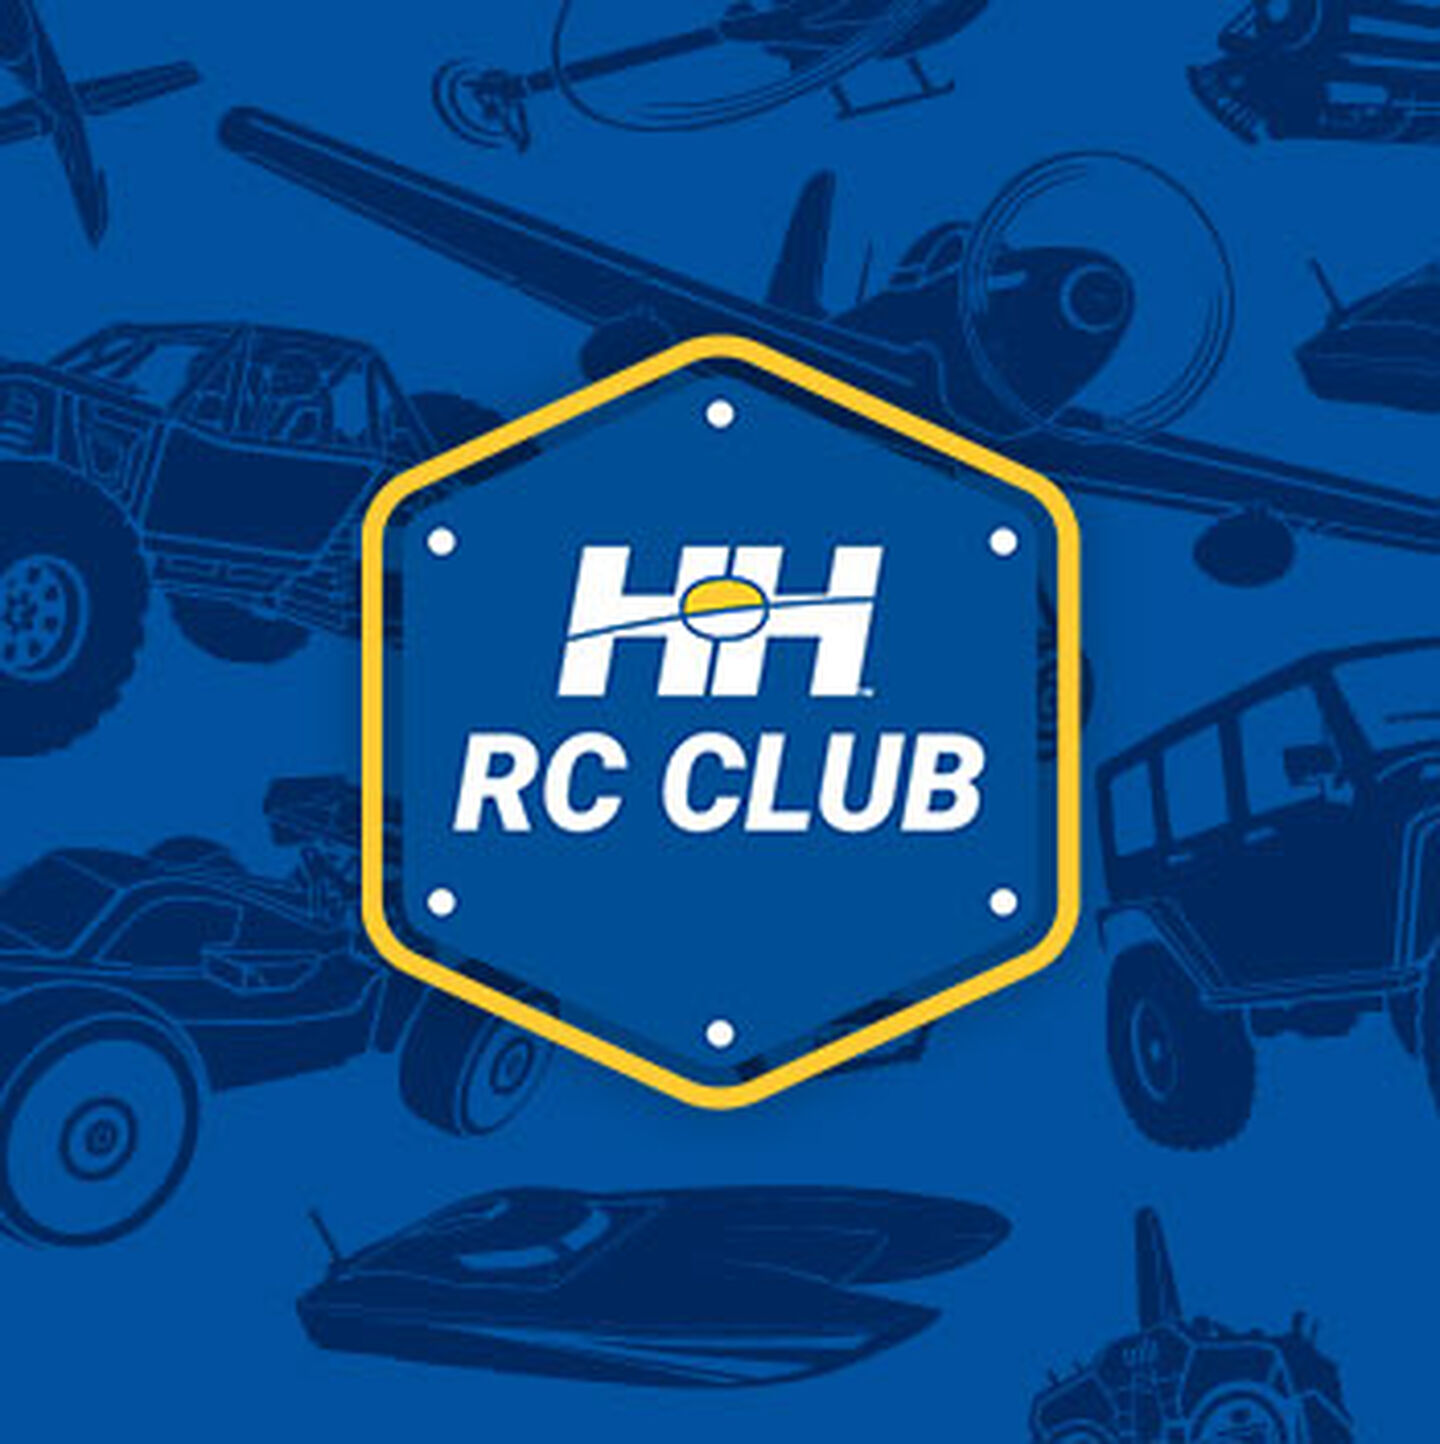 Become part of our RC Club and support Hobbies For Good that way